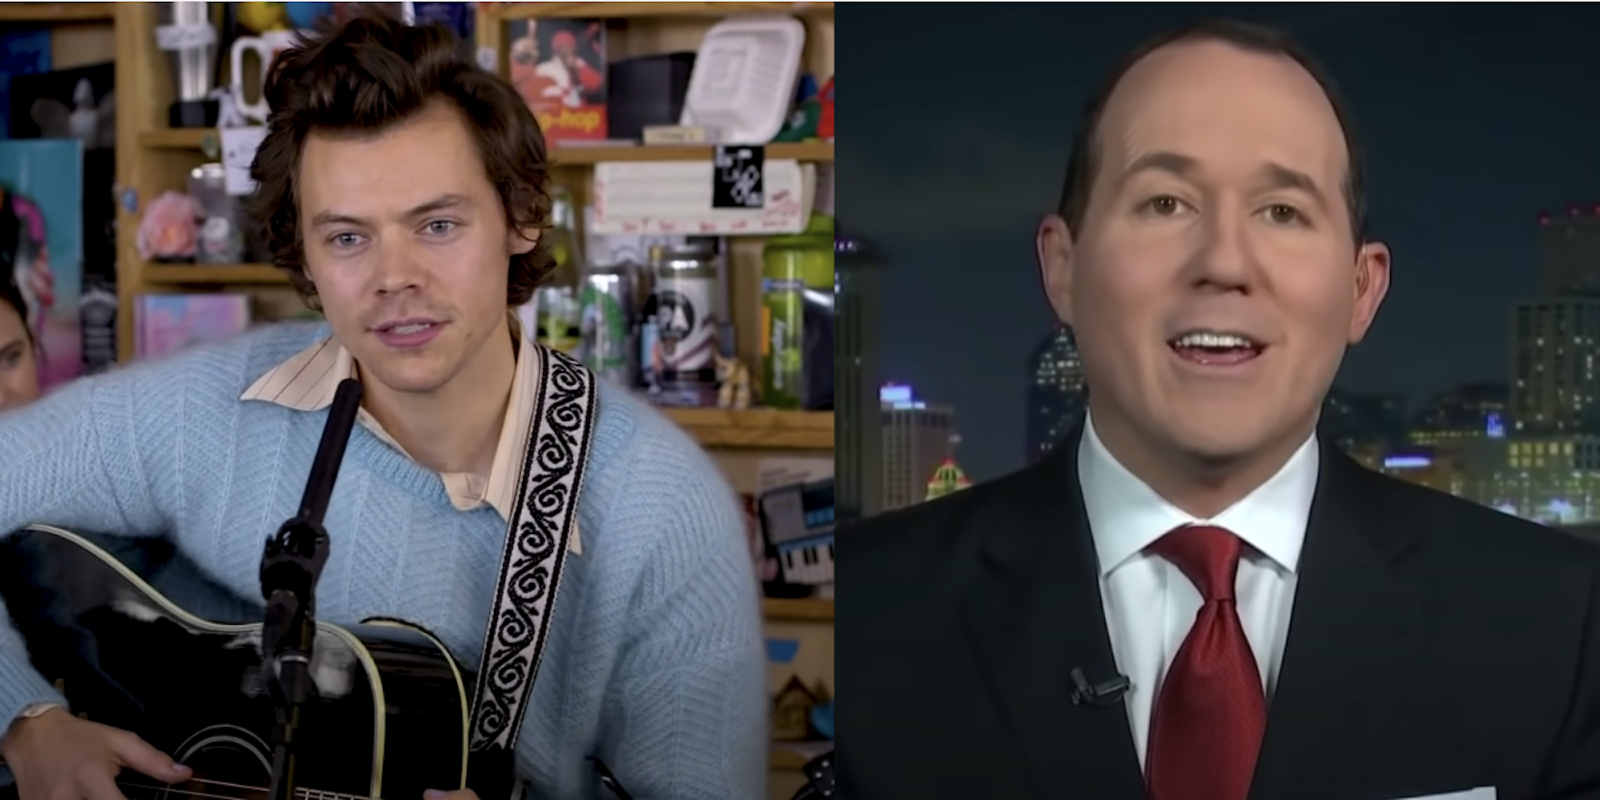 Hashtag 'Fox News Jacks Off To Harry Styles' goes viral after host attacks the singer's style